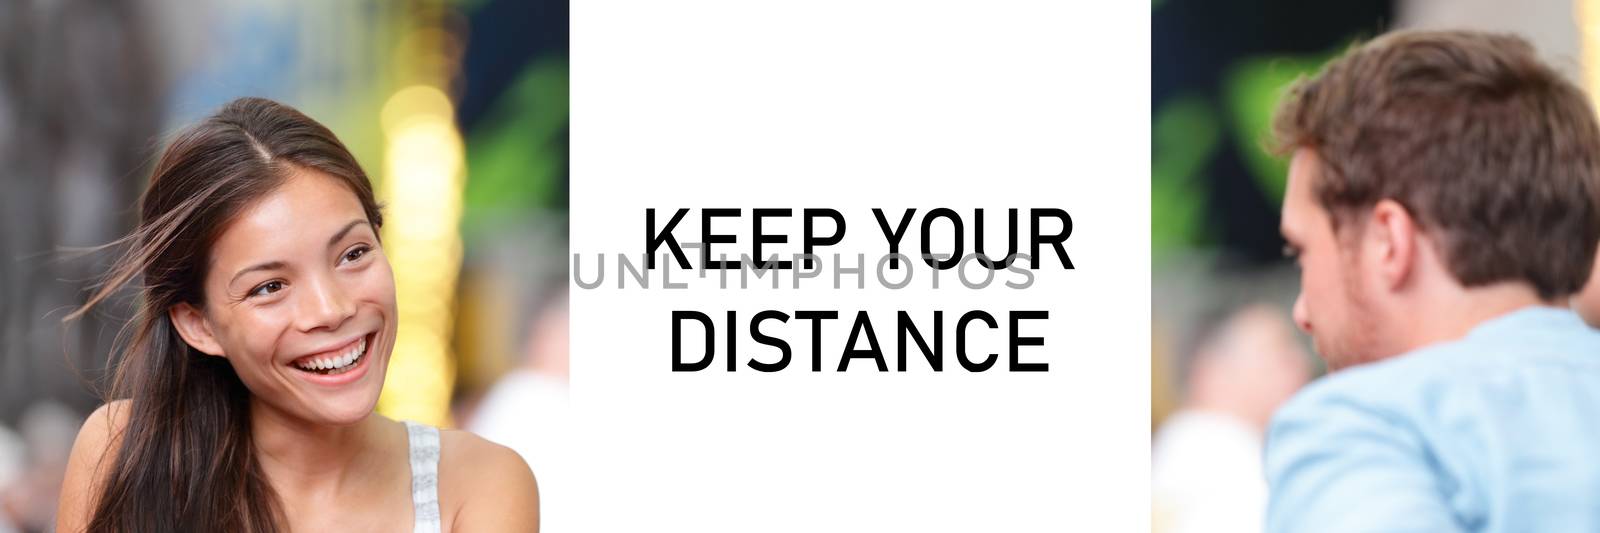 KEEP YOUR DISTANCE Covid-19 warning sign for people meeting talking together panoramic banner. Asian woman speaking to man by Maridav